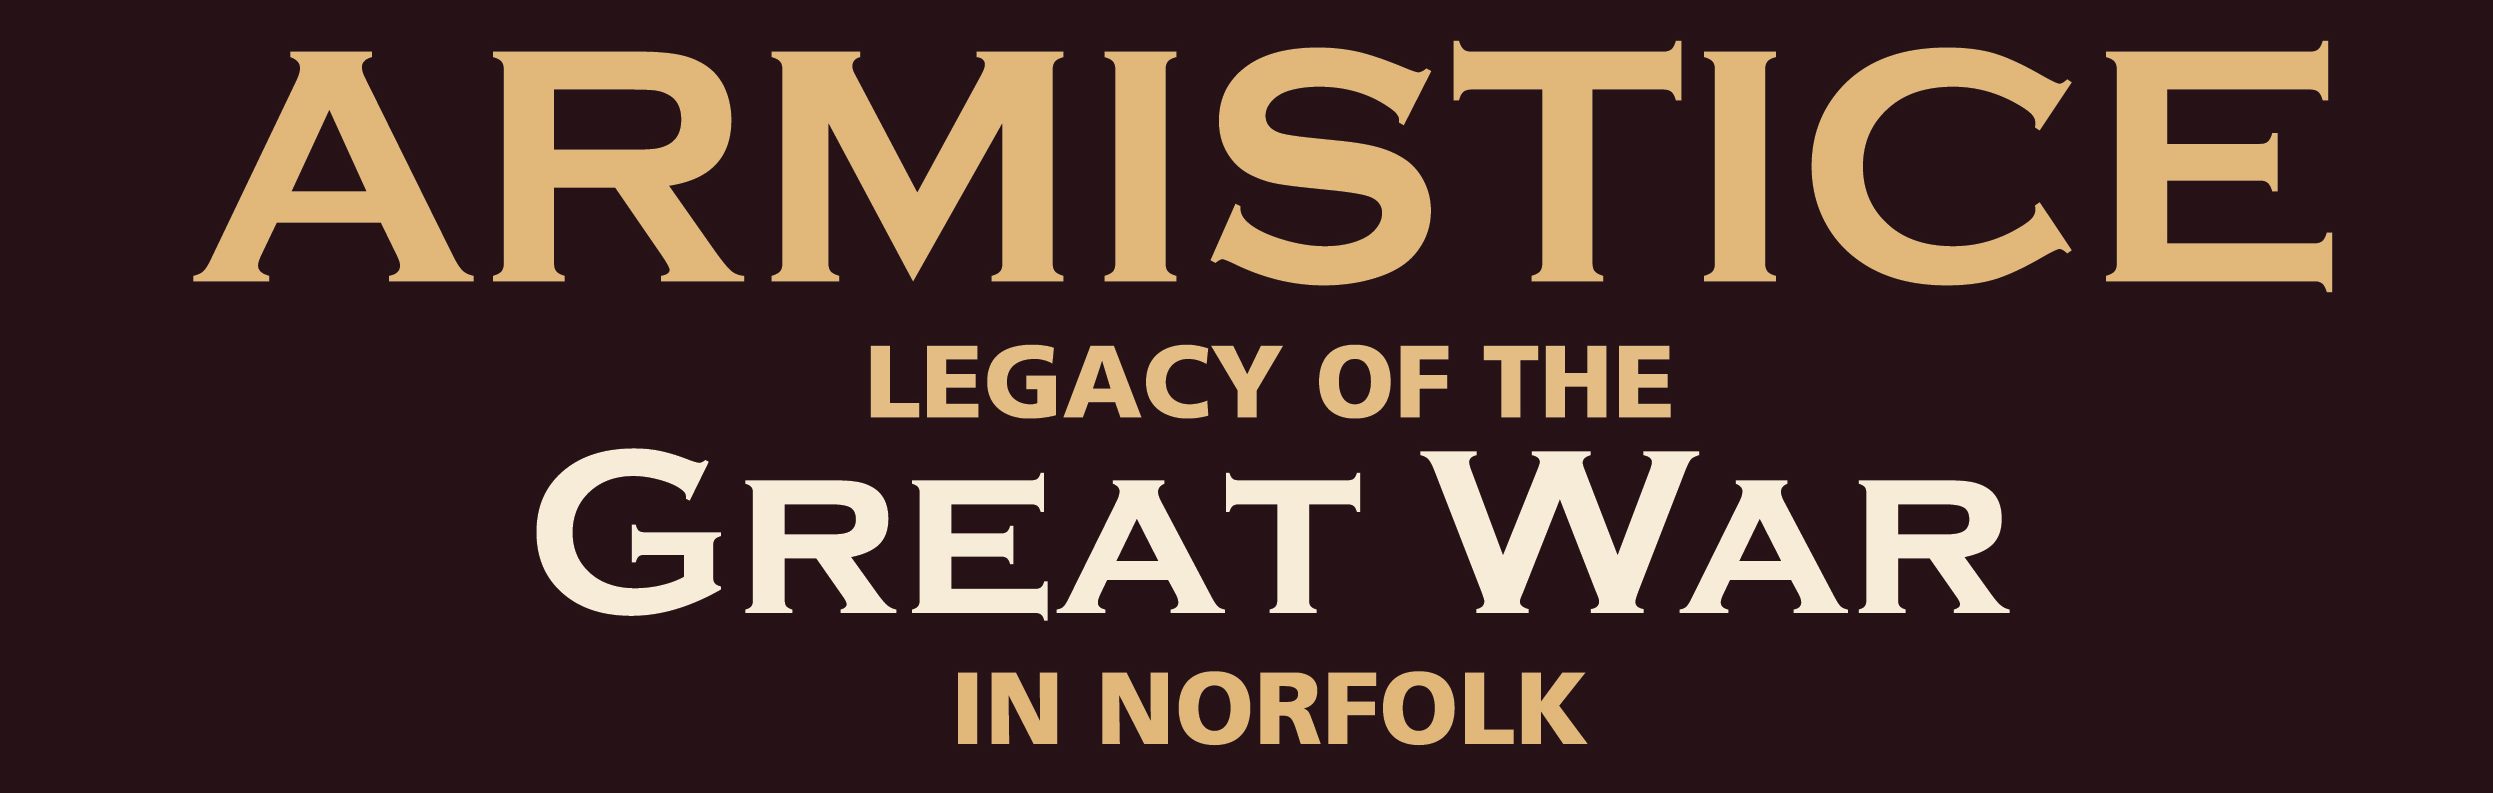 Armistice: Legacy of the Great War in Norfolk